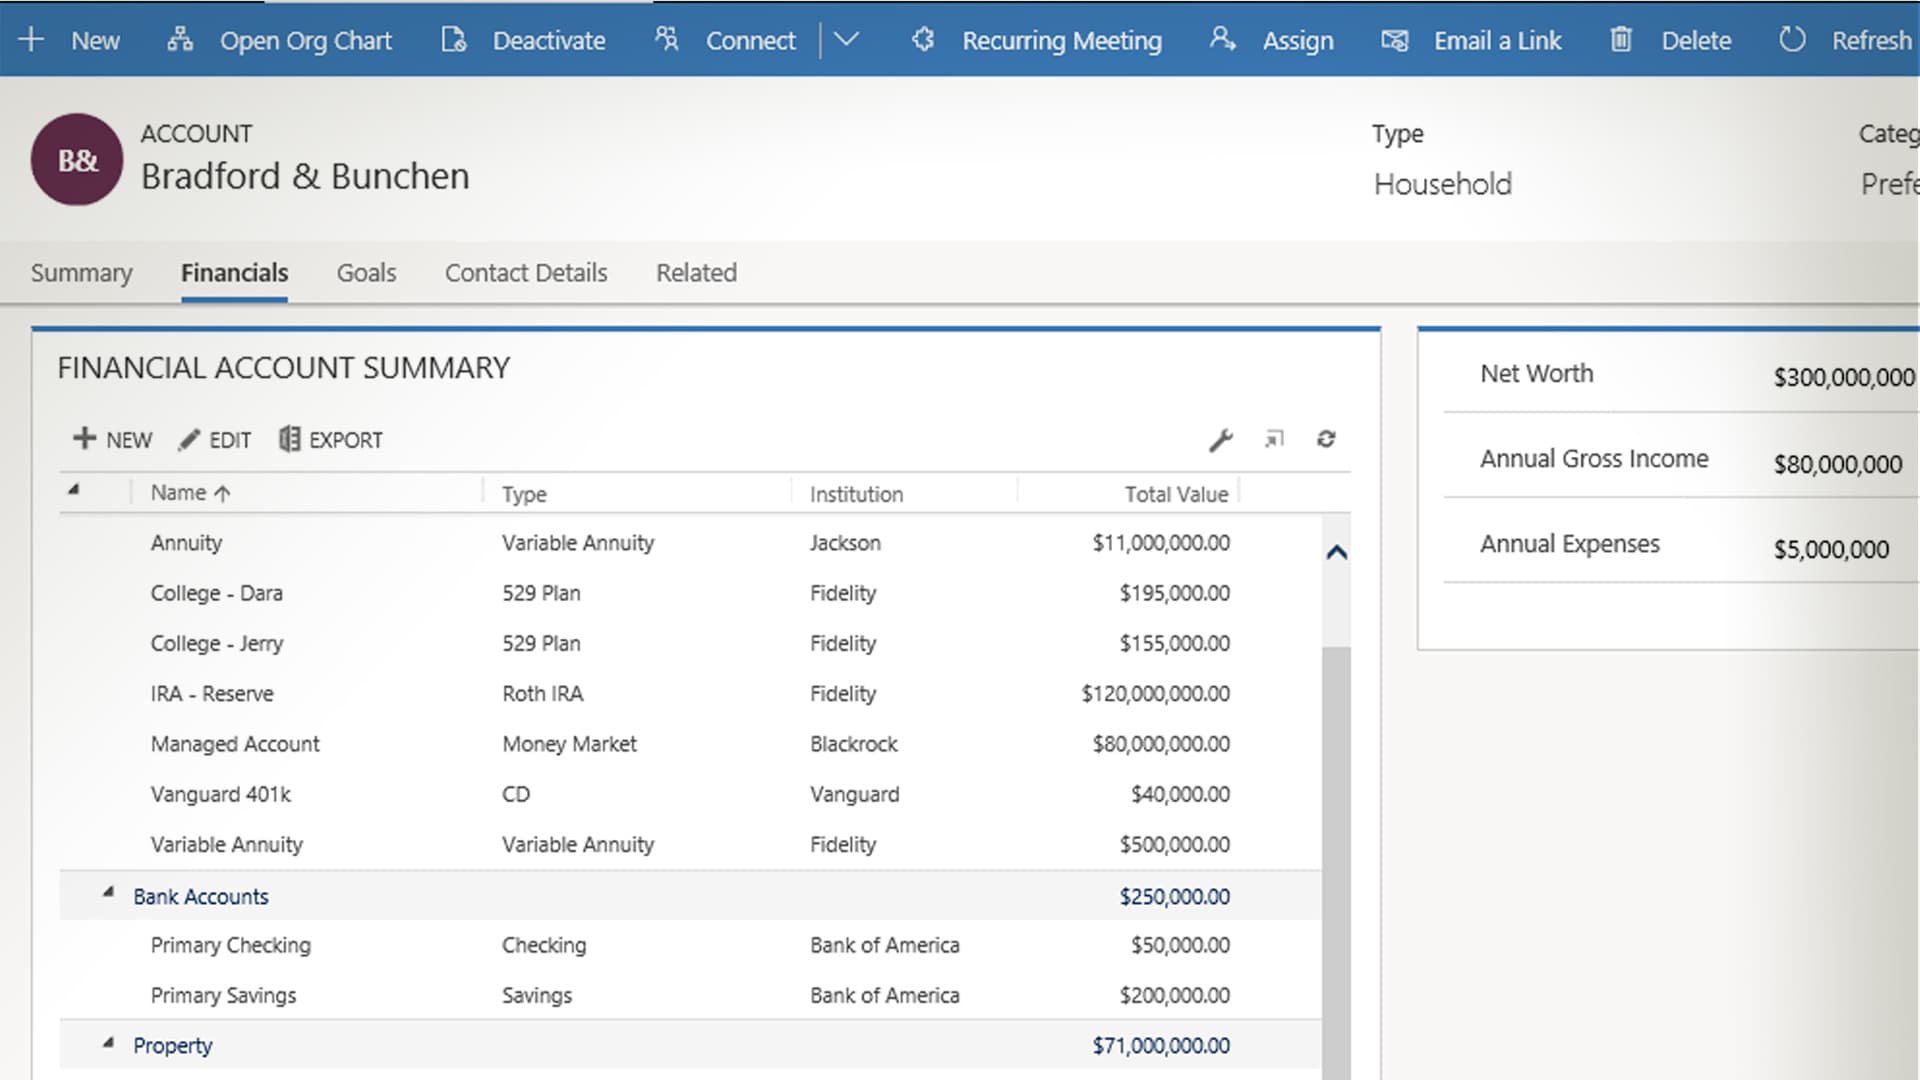 Get a snapshot view of client financial accounts. 